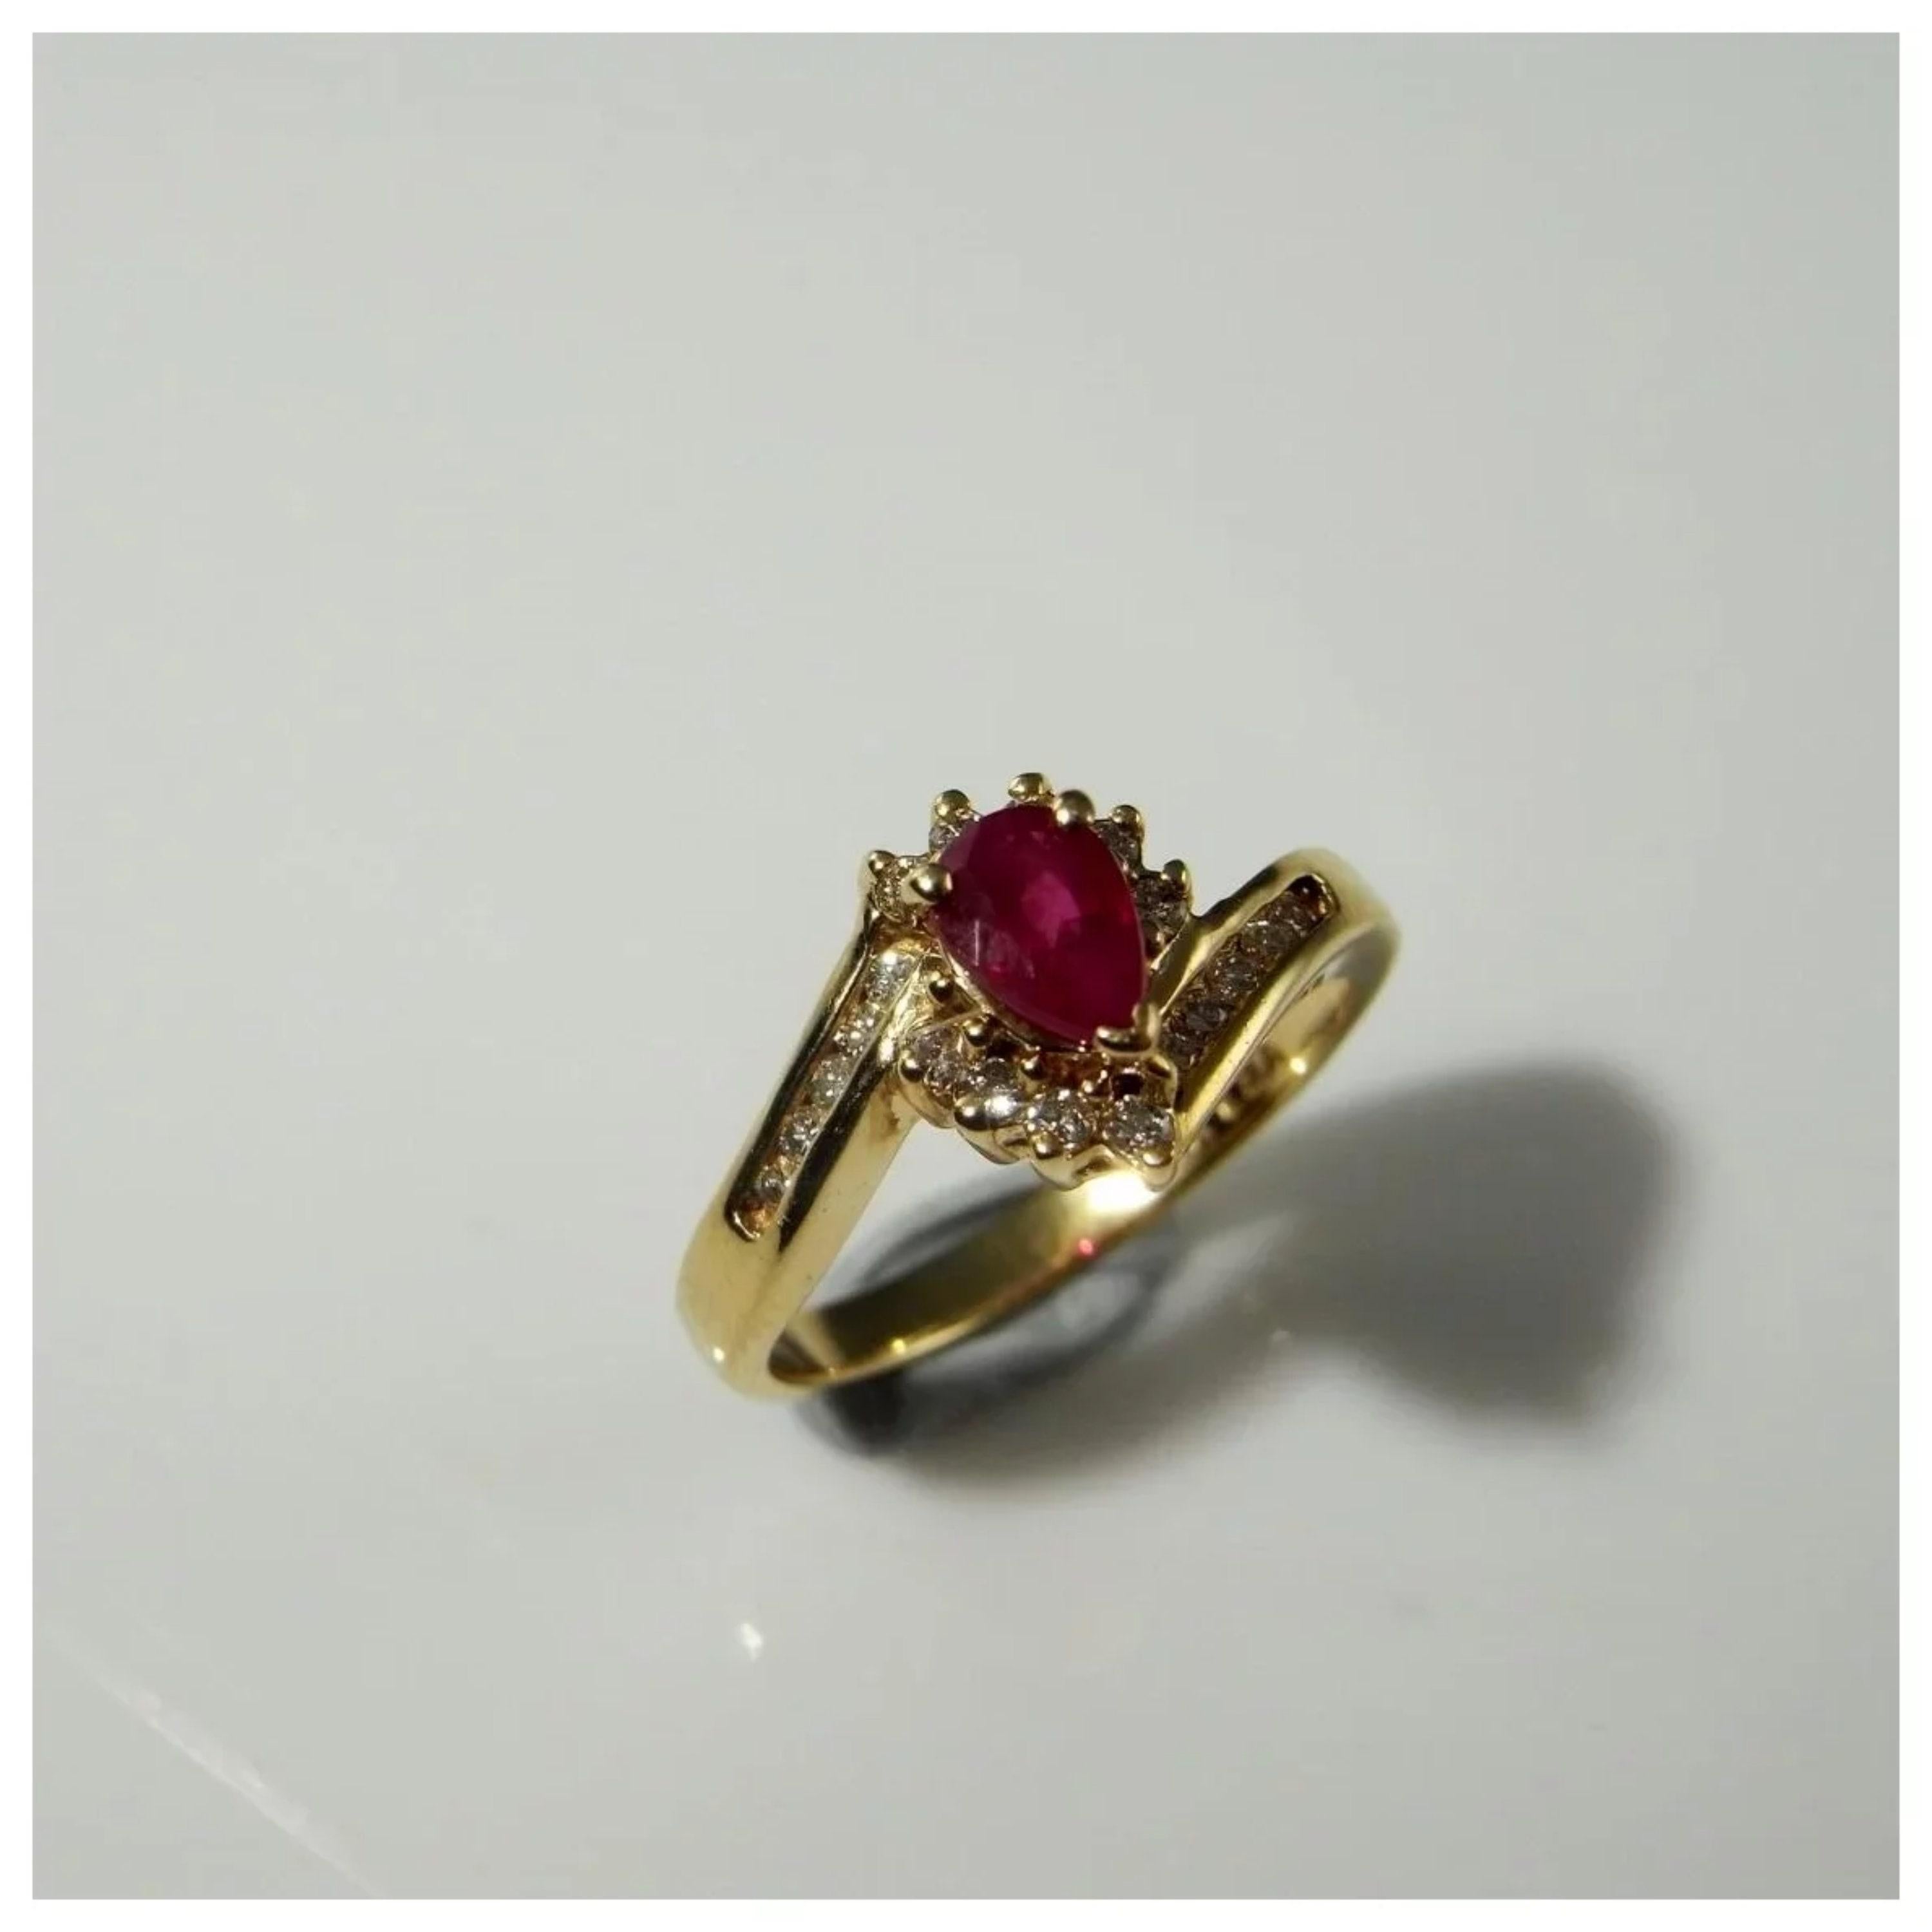 For Sale:  Certified Pear Cut Ruby and Diamond Yellow Gold Engagement Ring Wedding Ring 3